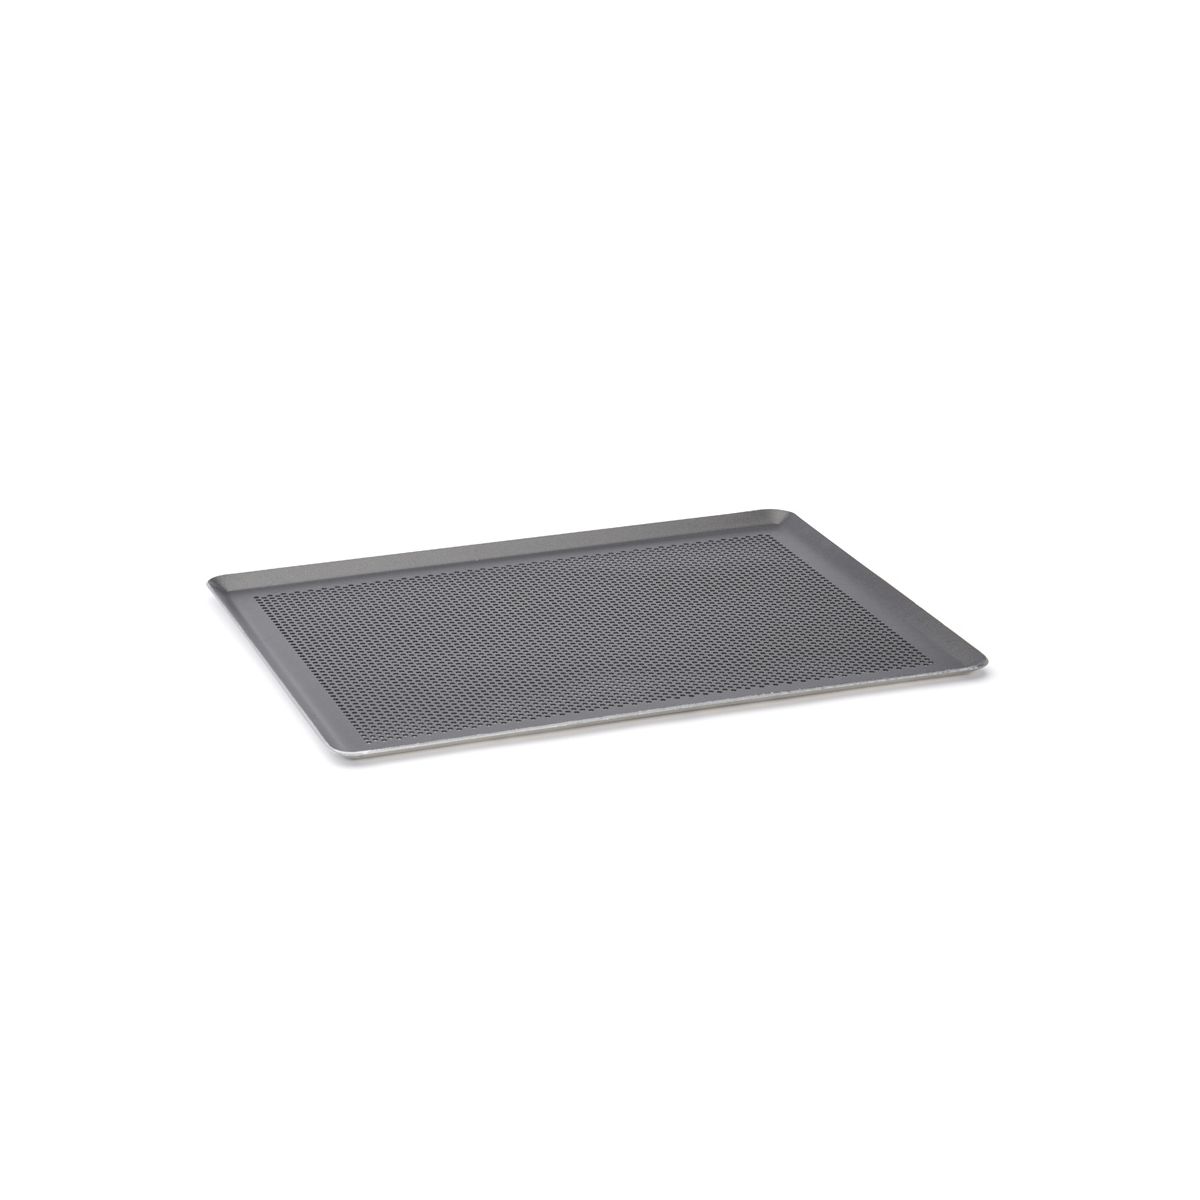 https://media2.debuyer.com/62645-thickbox_default/non-stick-baking-tray-microperforated.jpg